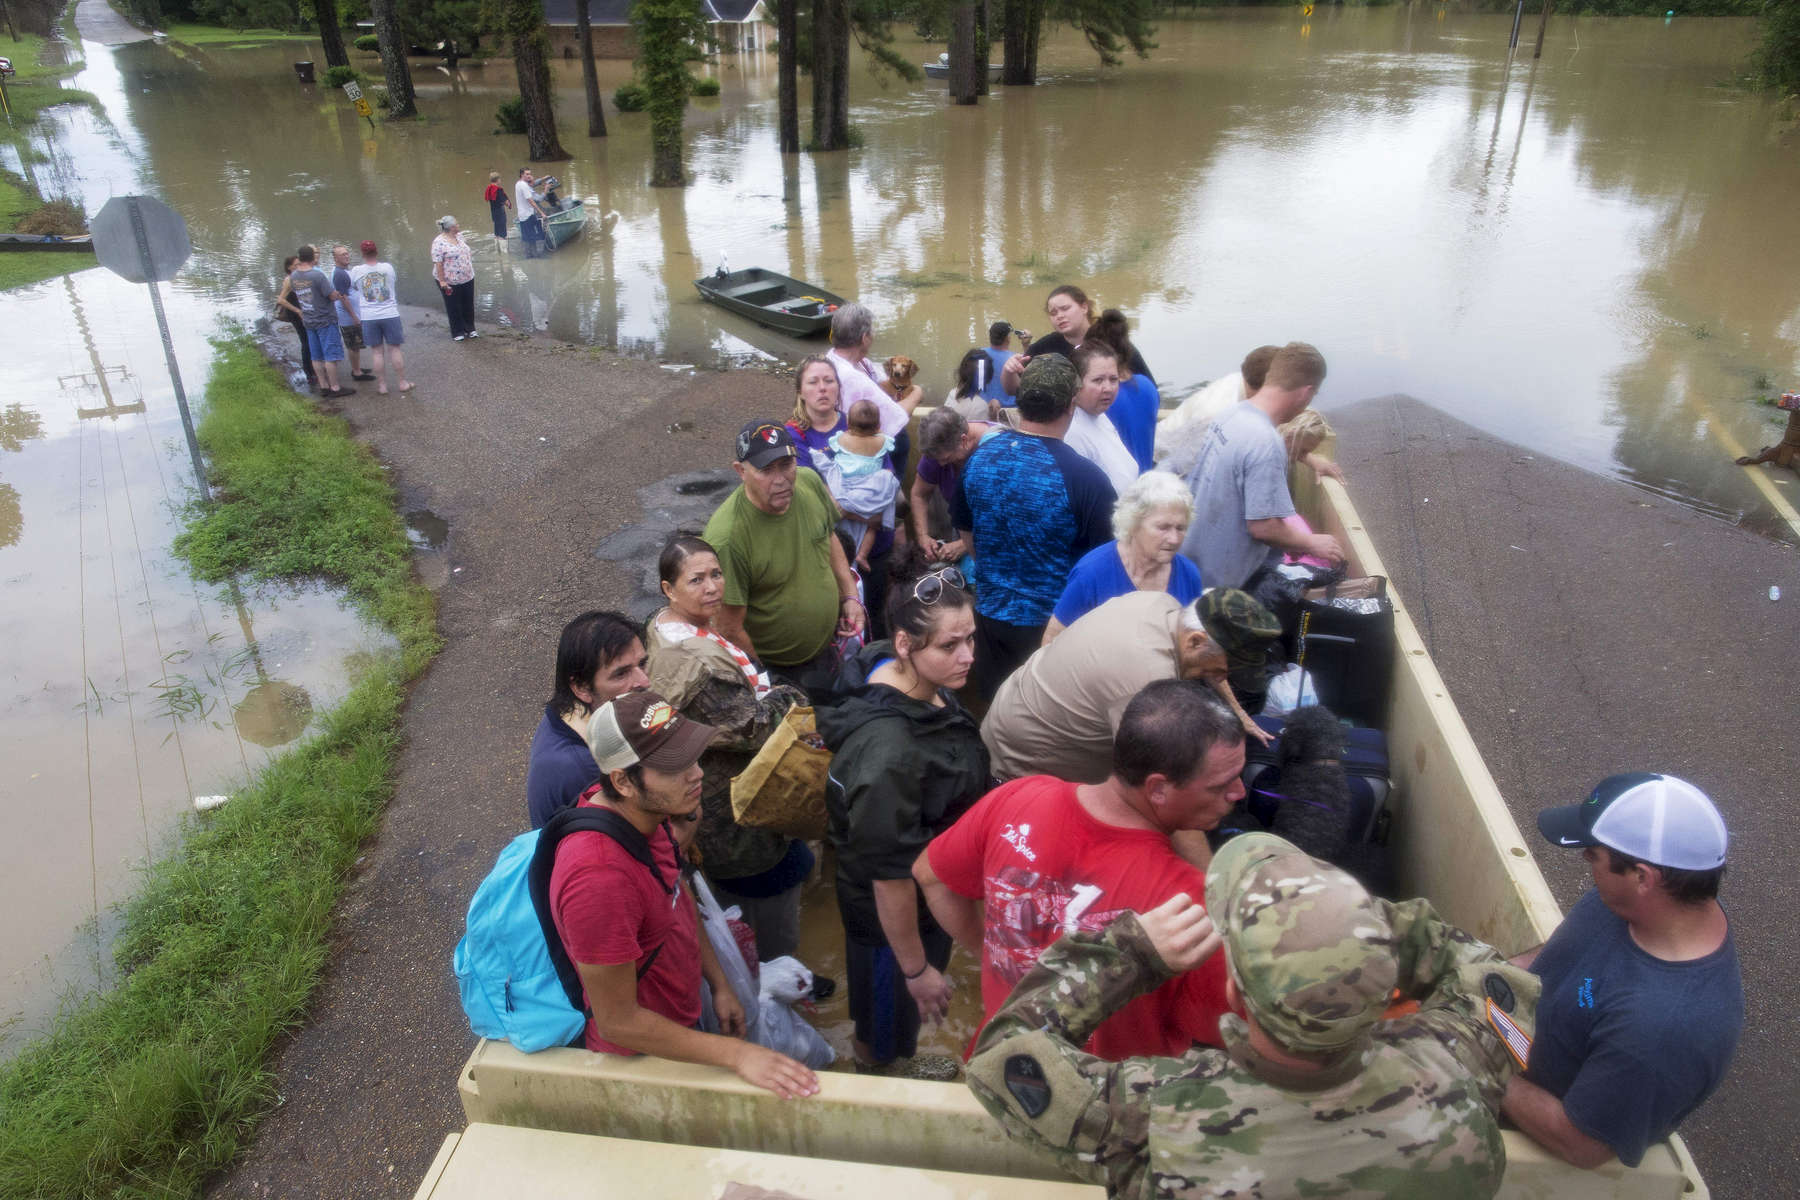 Sgt. Brad Stone of the Louisiana Army National Guard gives safety instructions to people loaded on a dump truck after they were stranded by rising flood water near Walker, La. USA, Sunday, Aug. 14, 2016. Rescuers have evacuated more than 20,000 people since the flooding started Friday and more than 10,000 people were in shelters as of late Sunday, according to Louisiana Gov. John Bel Edwards. (AP Photo/Max Becherer)